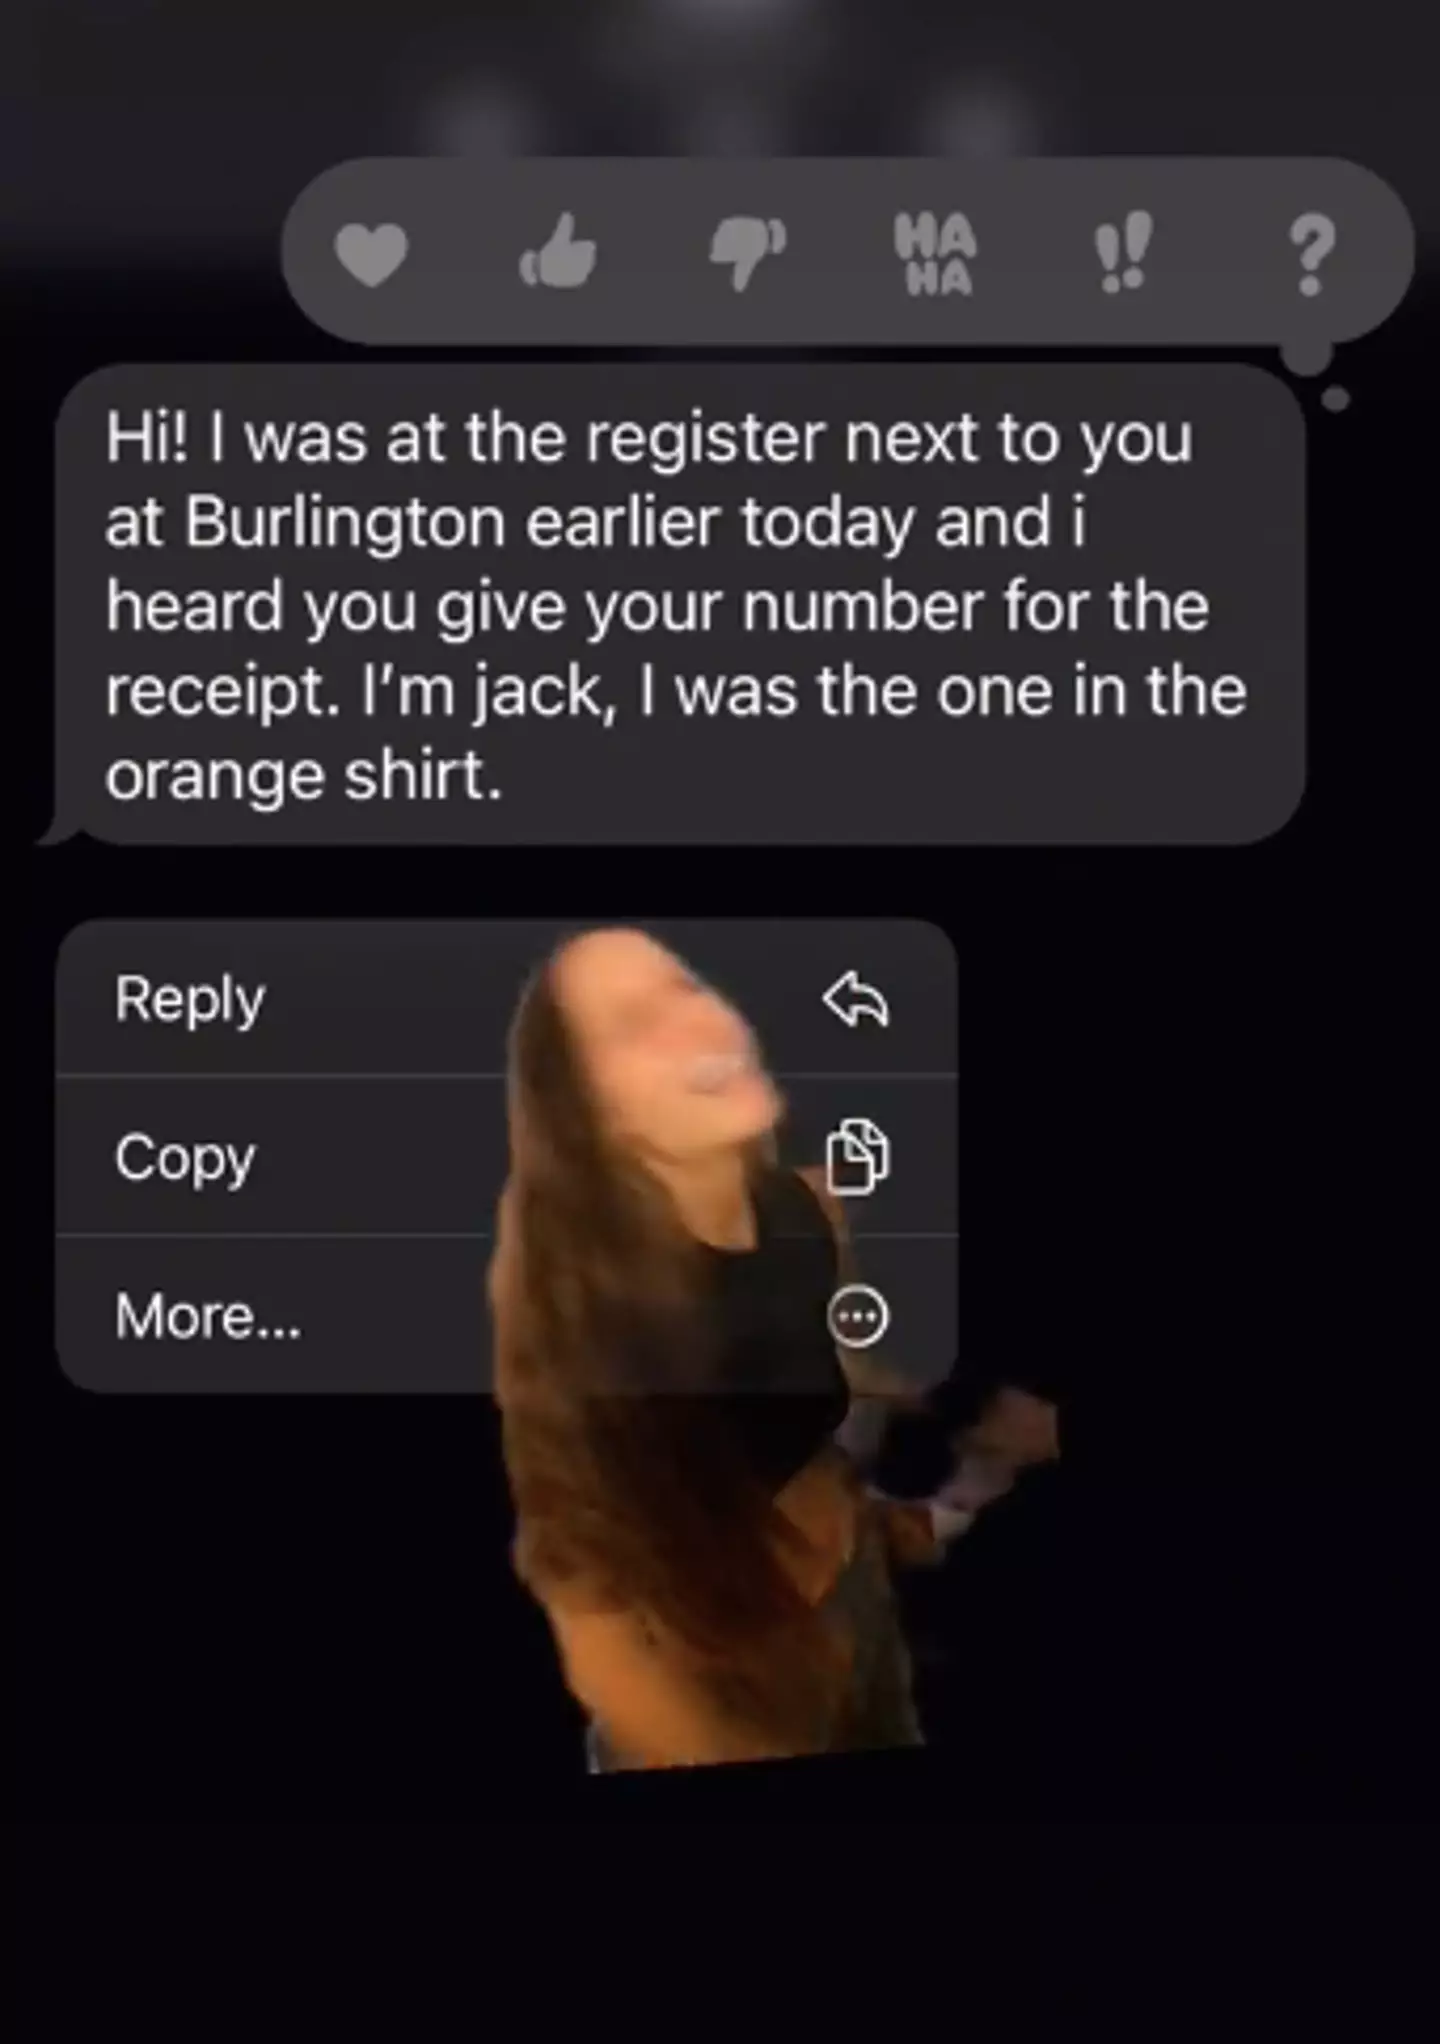 Ally received a message from a stranger (